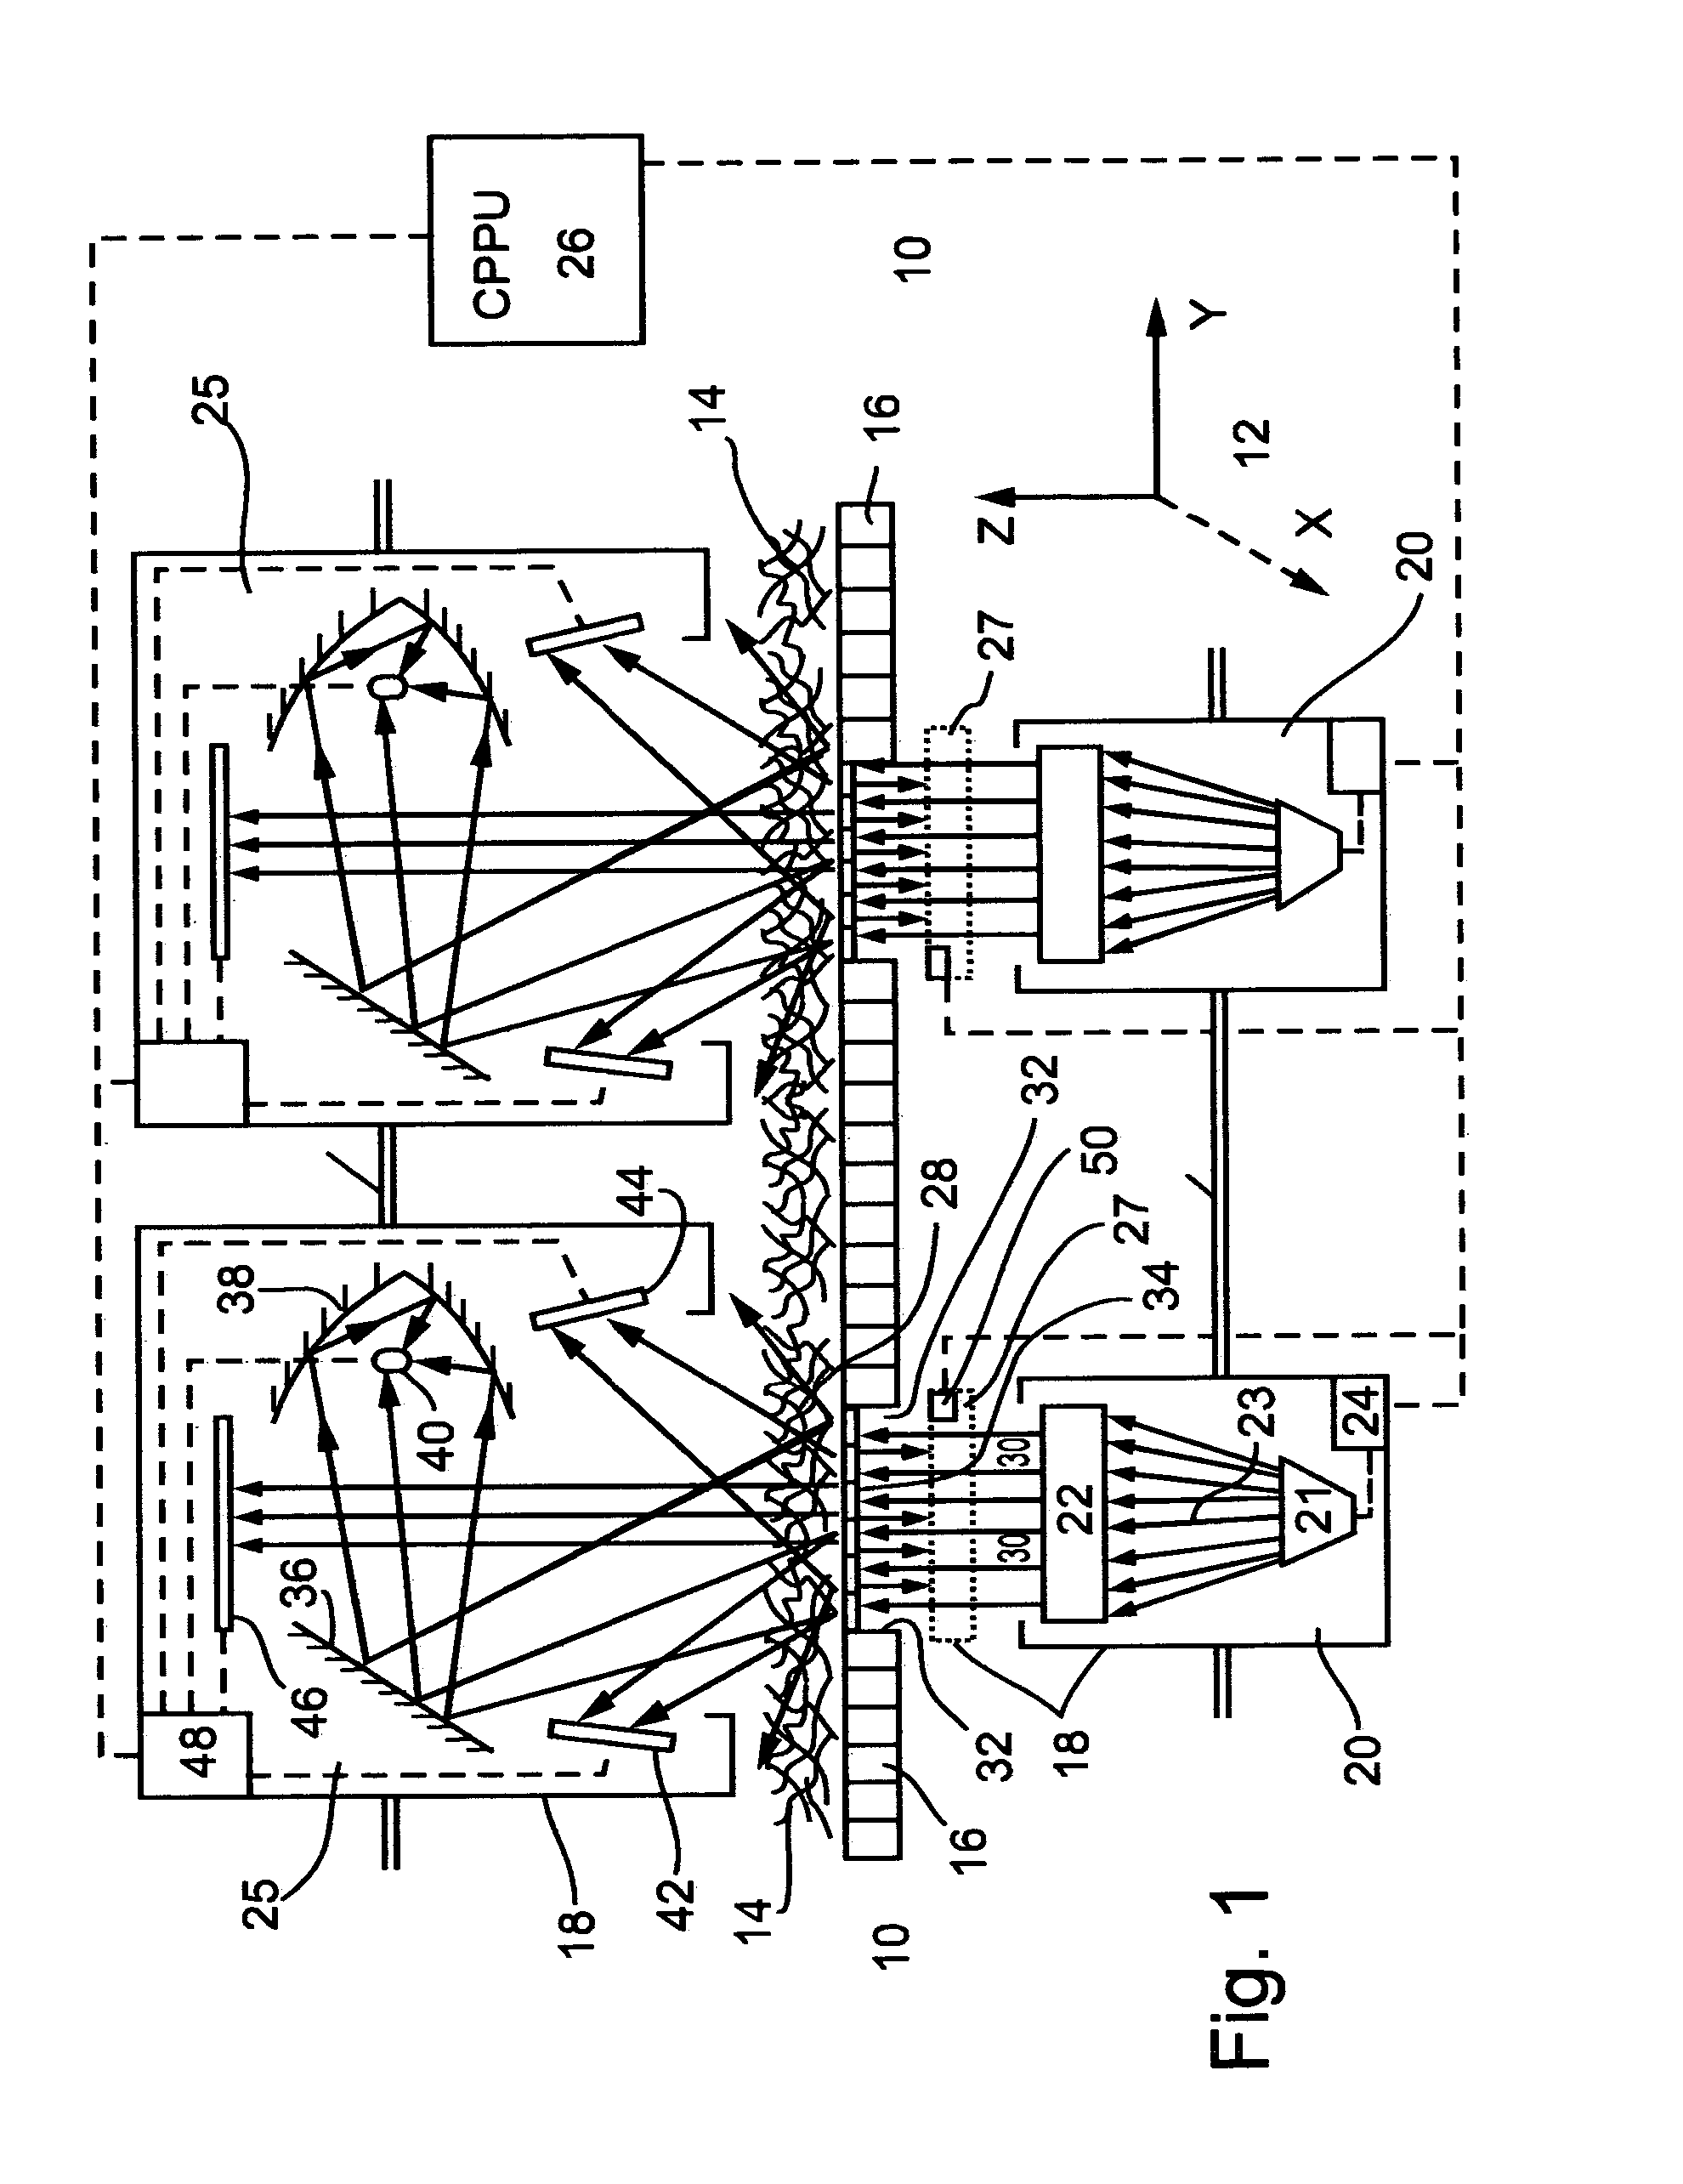 Method and device for non-invasively optically determining bulk density and uniformity of web configured material during in-line processing